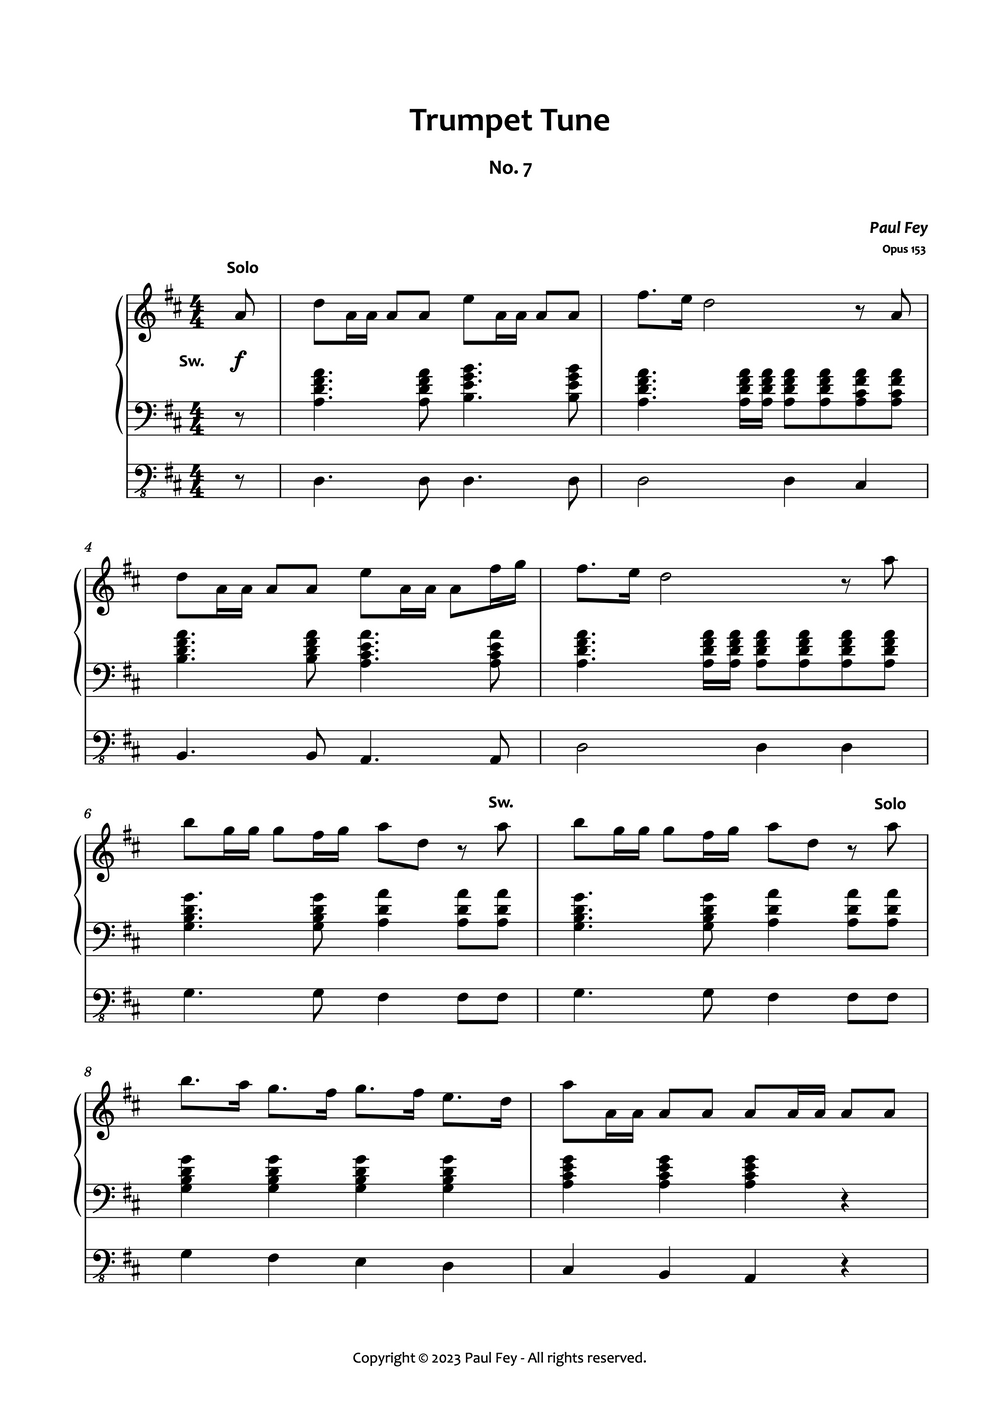 Trumpet Tune No, 7 Pipe Organ Sheet Music By Paul Fey Organist and Pianist Famous Organist on YouTube